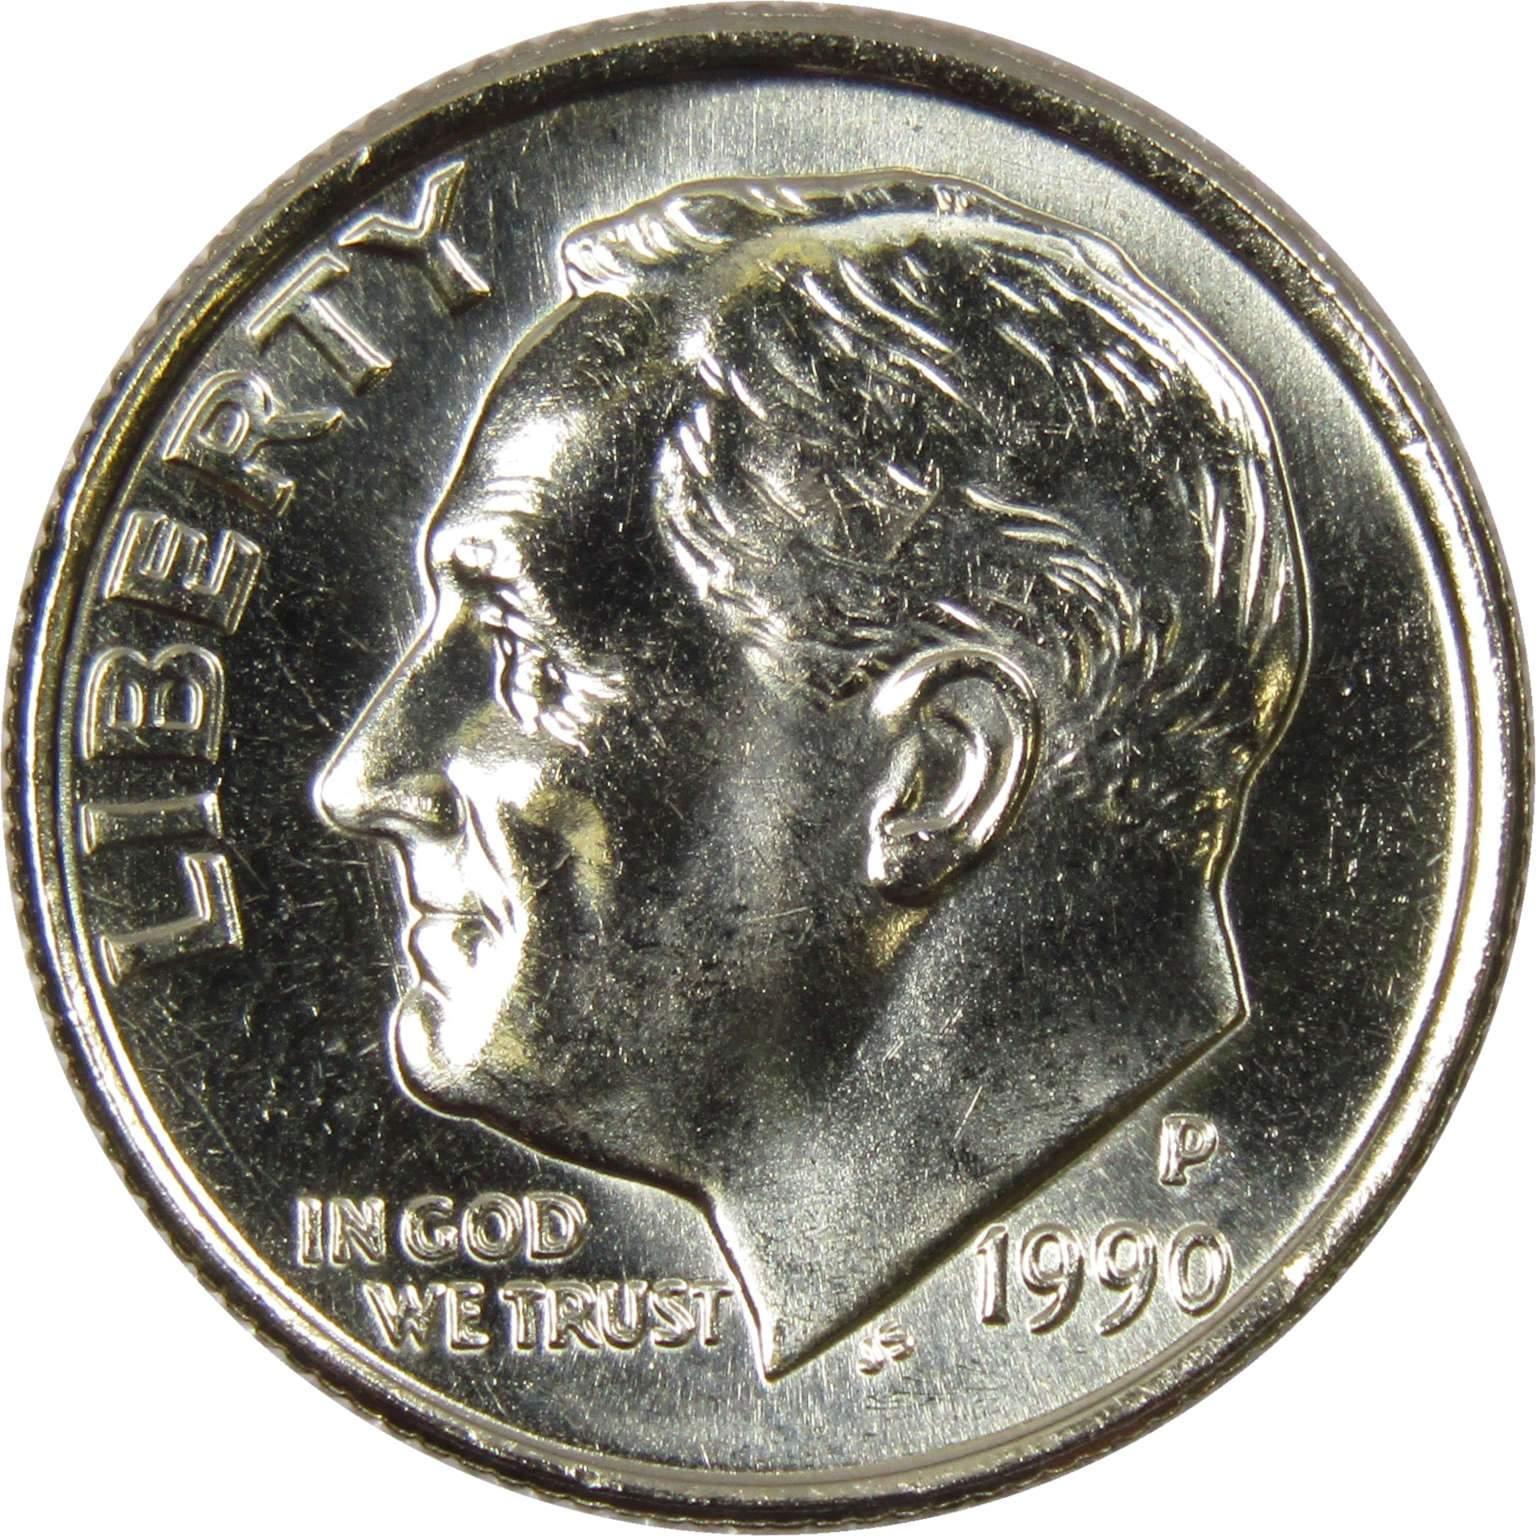 1990 P Roosevelt Dime BU Uncirculated Mint State 10c US Coin Collectible